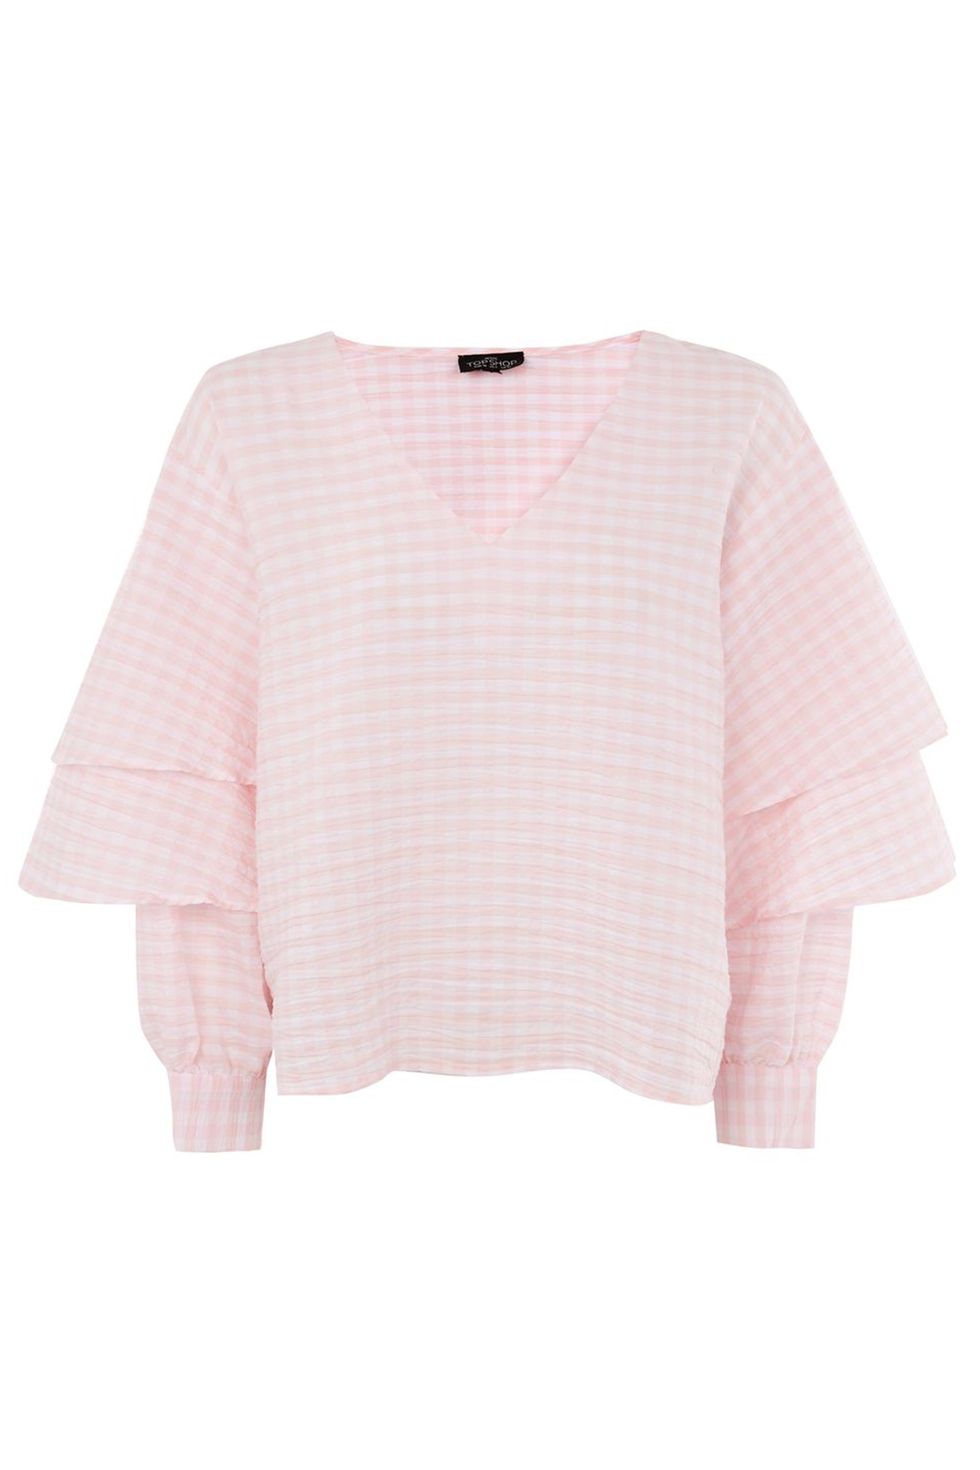 Clothing, Pink, Sleeve, Outerwear, T-shirt, Sweater, Top, Blouse, Jersey, Crop top, 